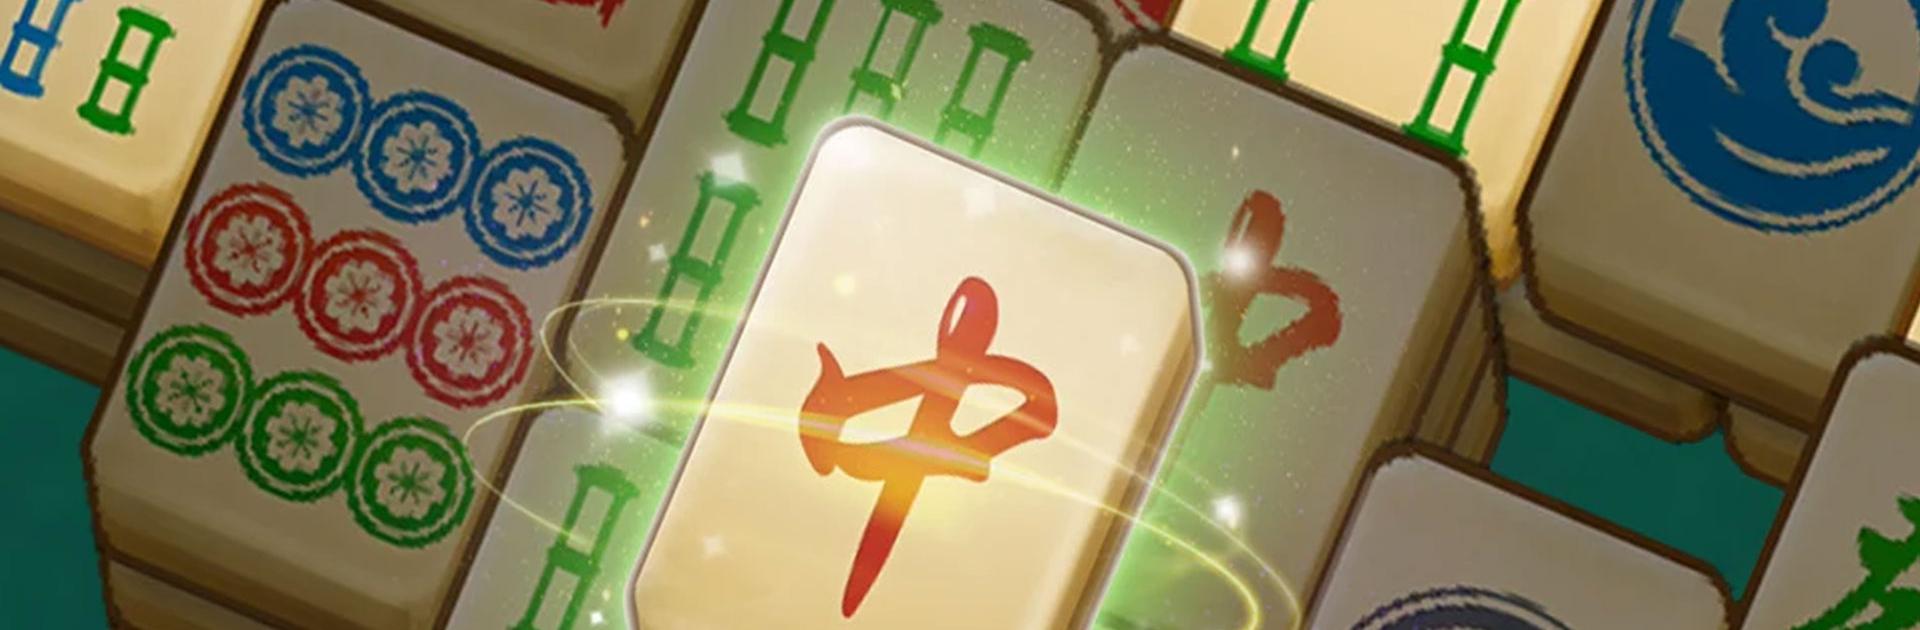 Play Mahjong Solitaire: Classic Online